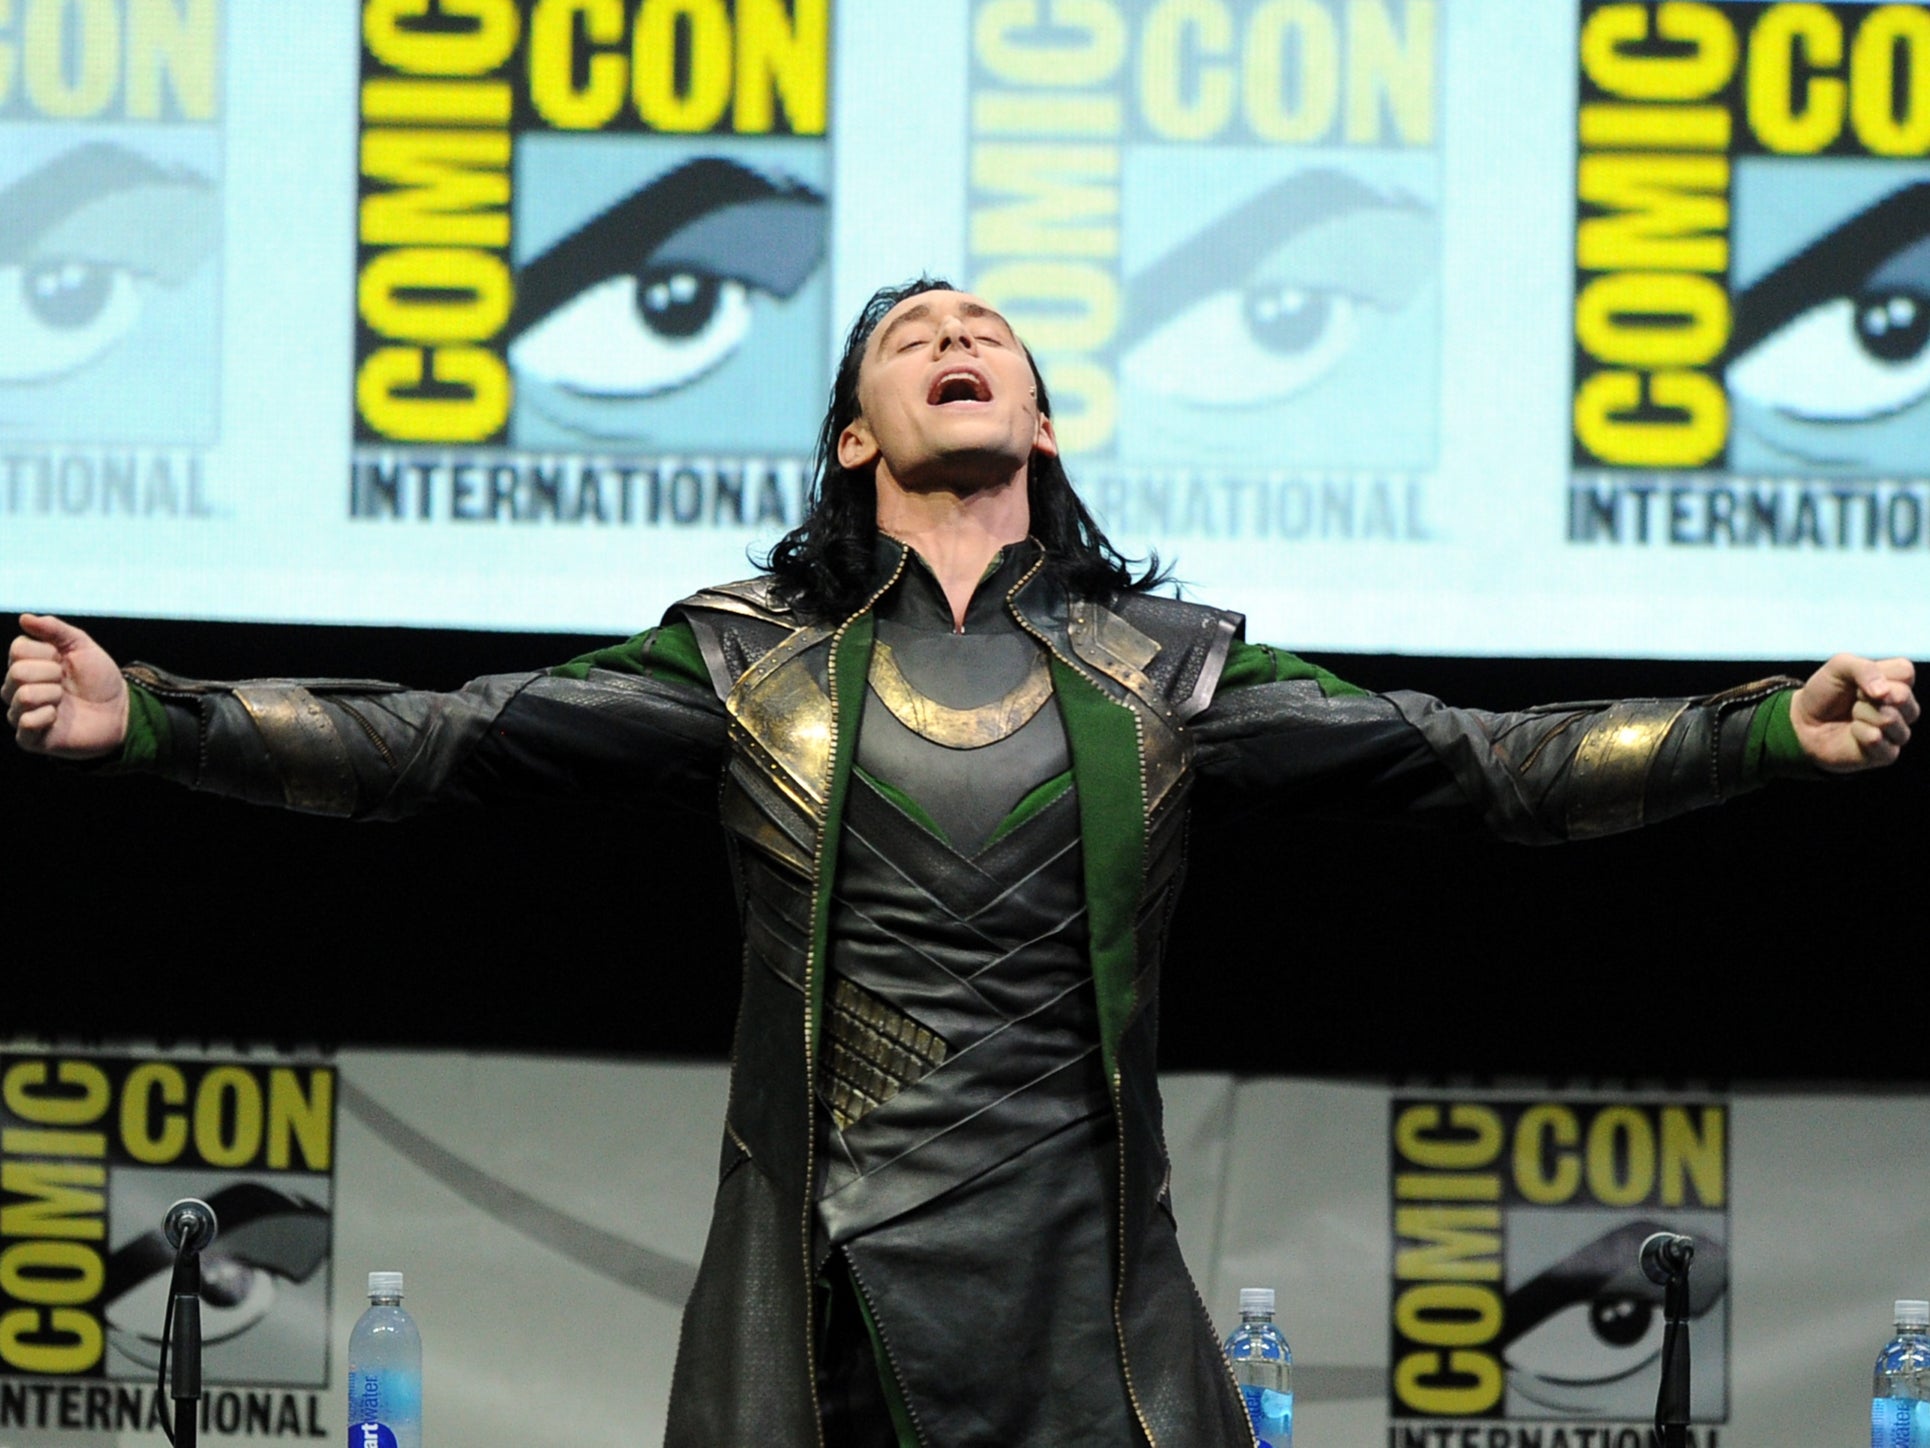 Tom Hiddleston appears in character as Loki at the San Diego Comic Con on 20 July 2013